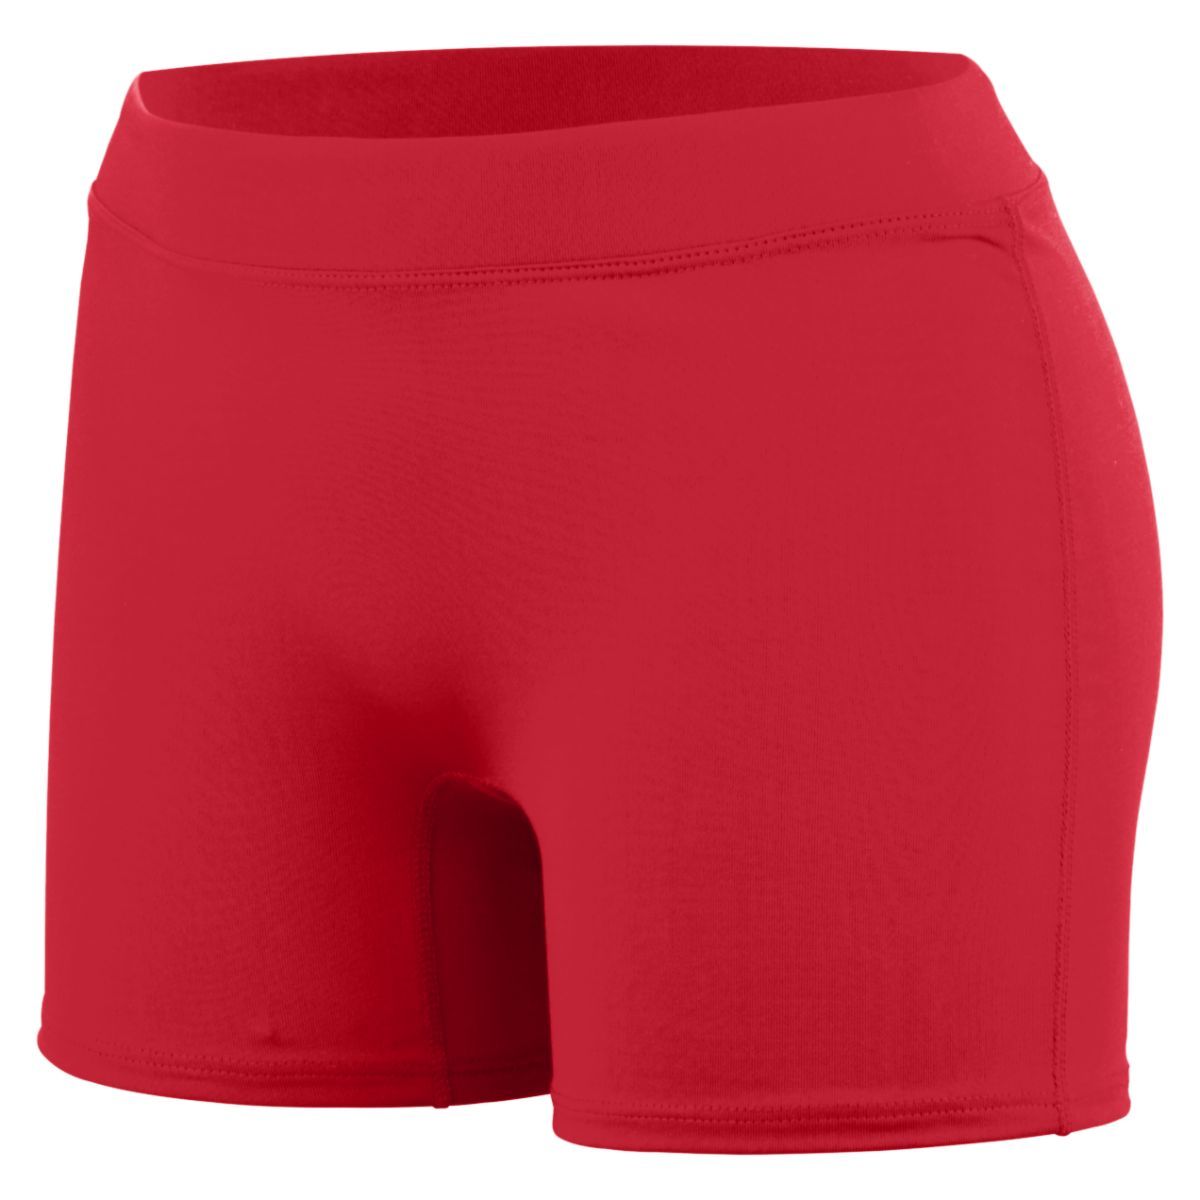 Augusta Sportswear Girls Enthuse Shorts in Red  -Part of the Girls, Augusta-Products, Volleyball, Girls-Shorts product lines at KanaleyCreations.com